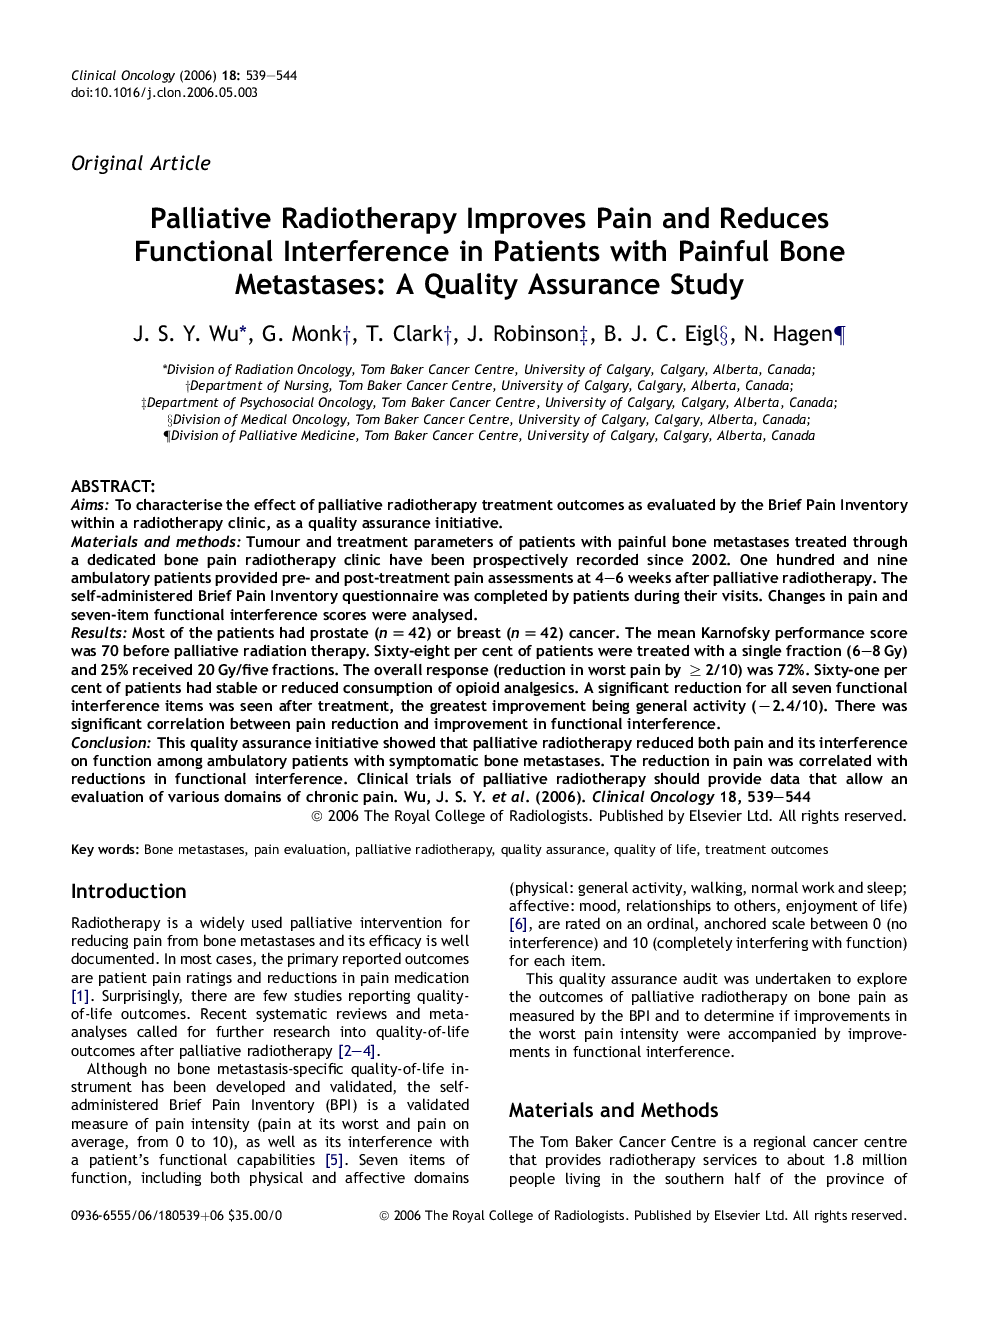 Palliative Radiotherapy Improves Pain and Reduces Functional Interference in Patients with Painful Bone Metastases: A Quality Assurance Study